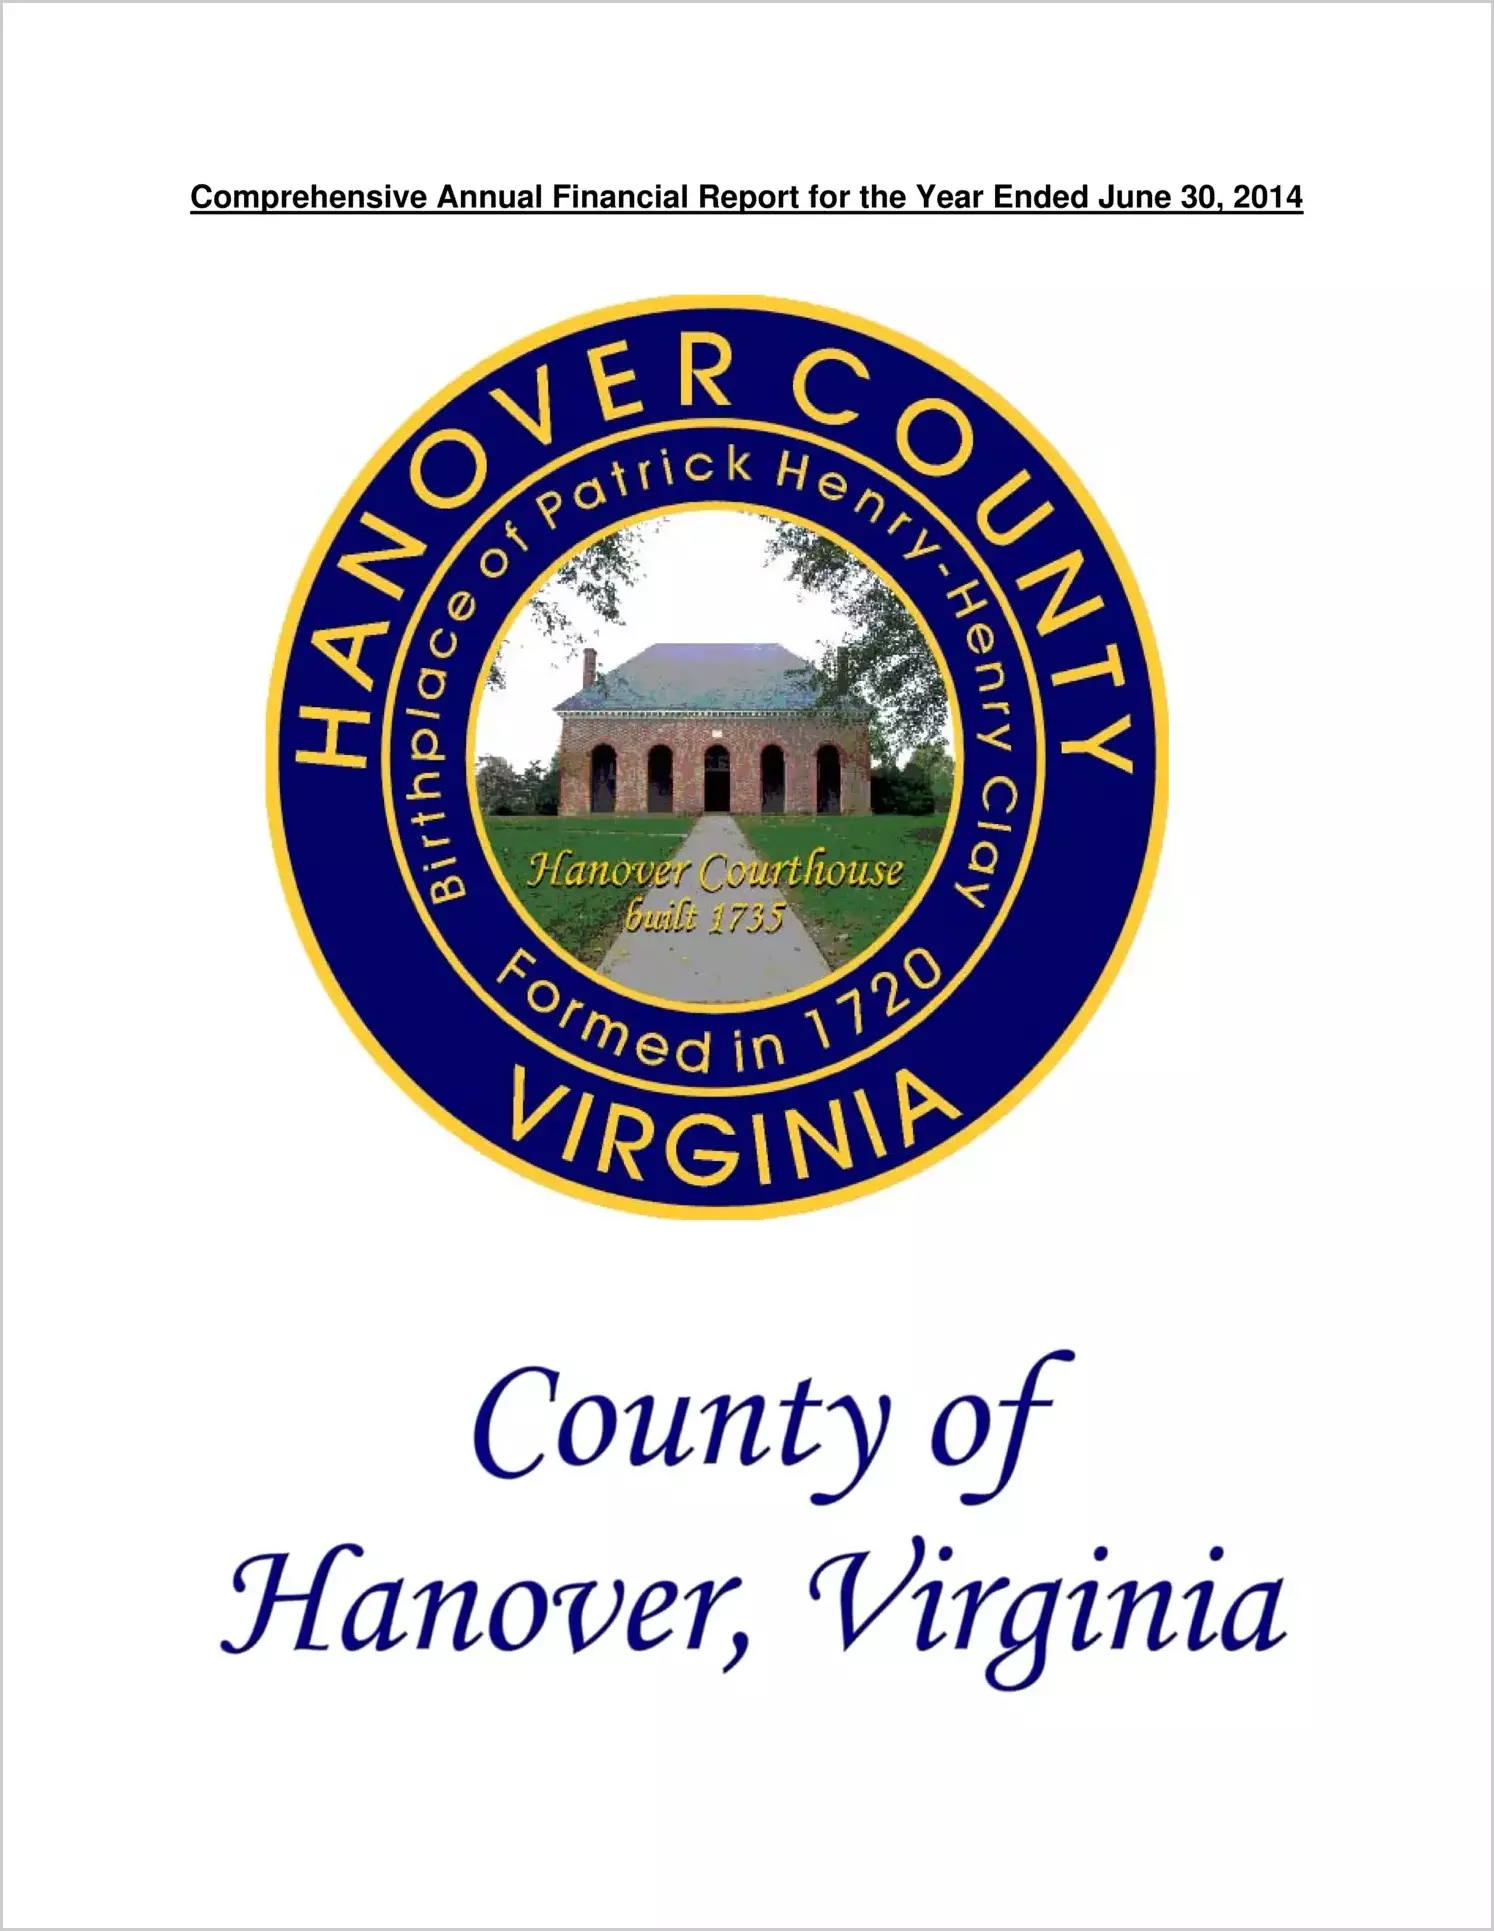 2014 Annual Financial Report for County of Hanover